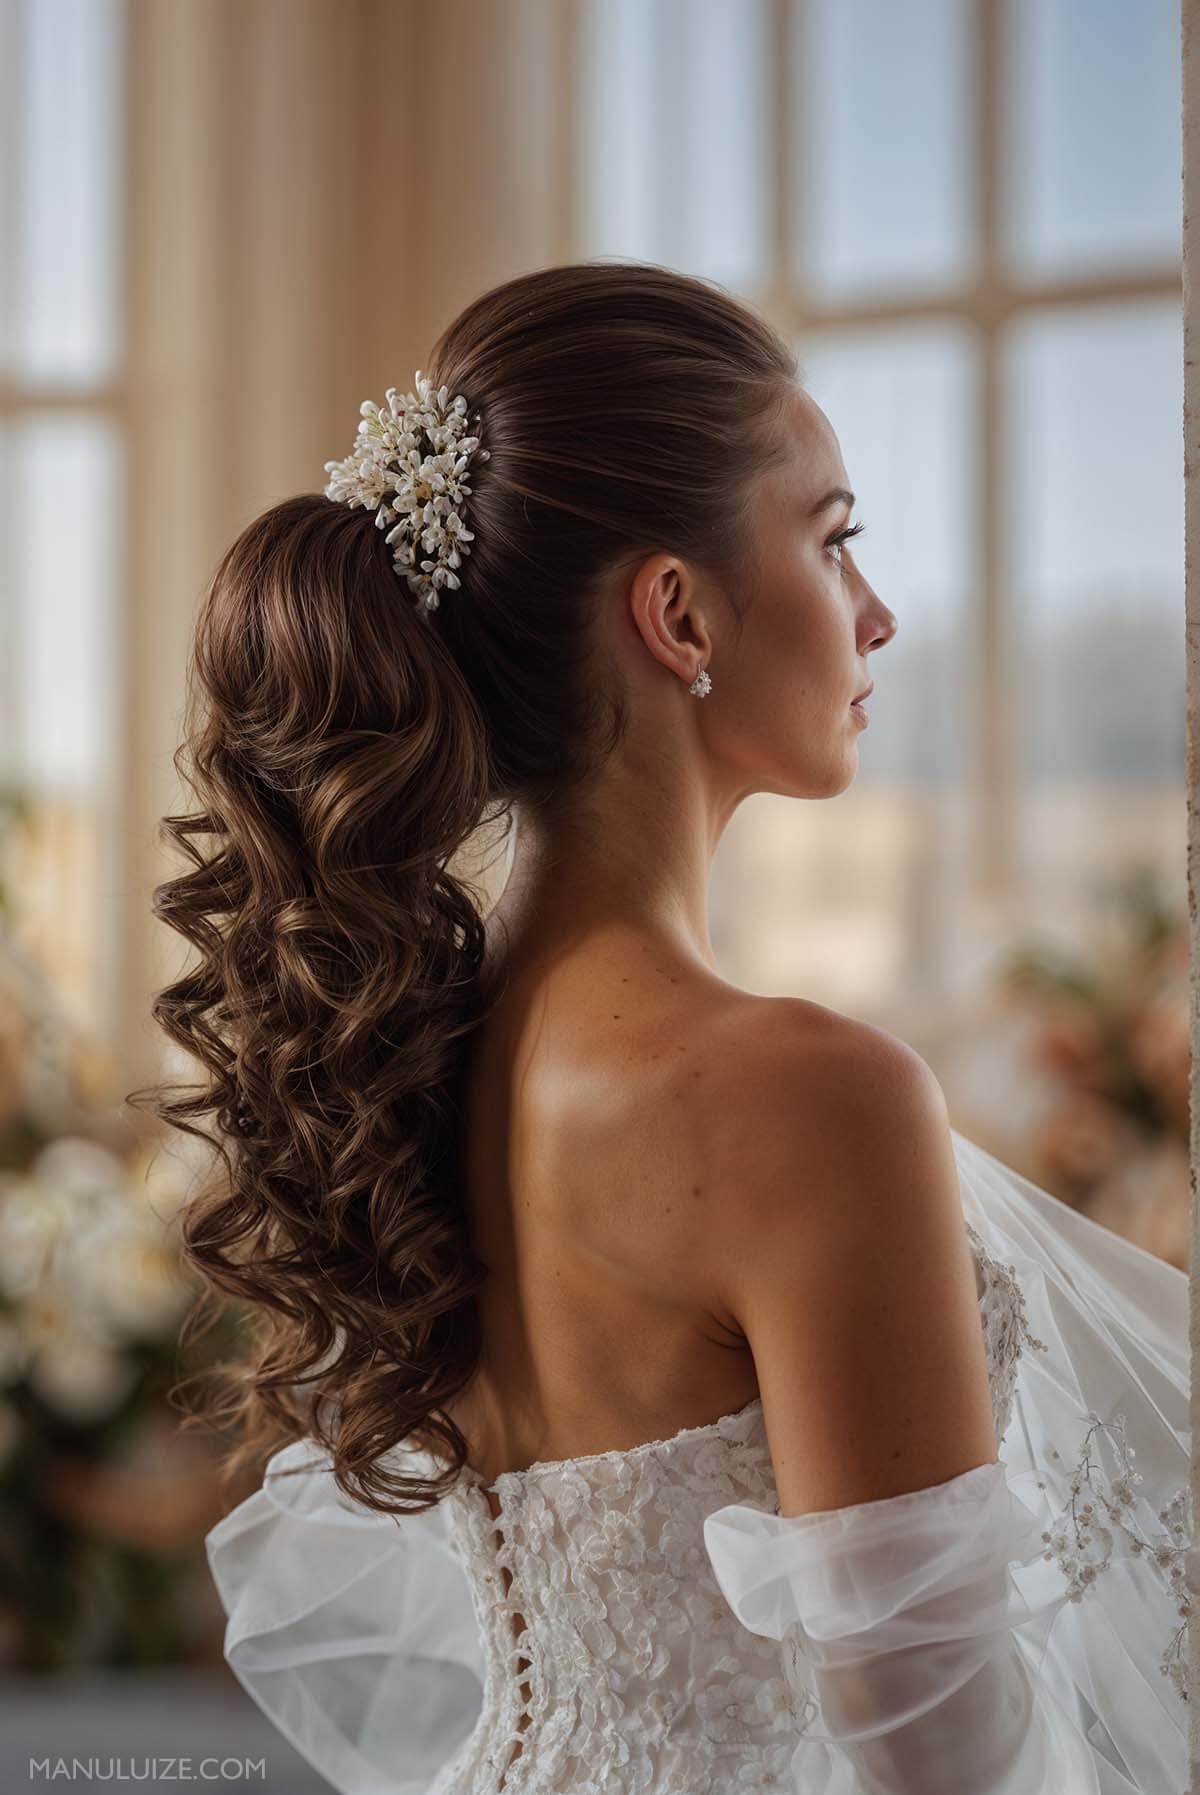 Bridal pony tail hairstyle